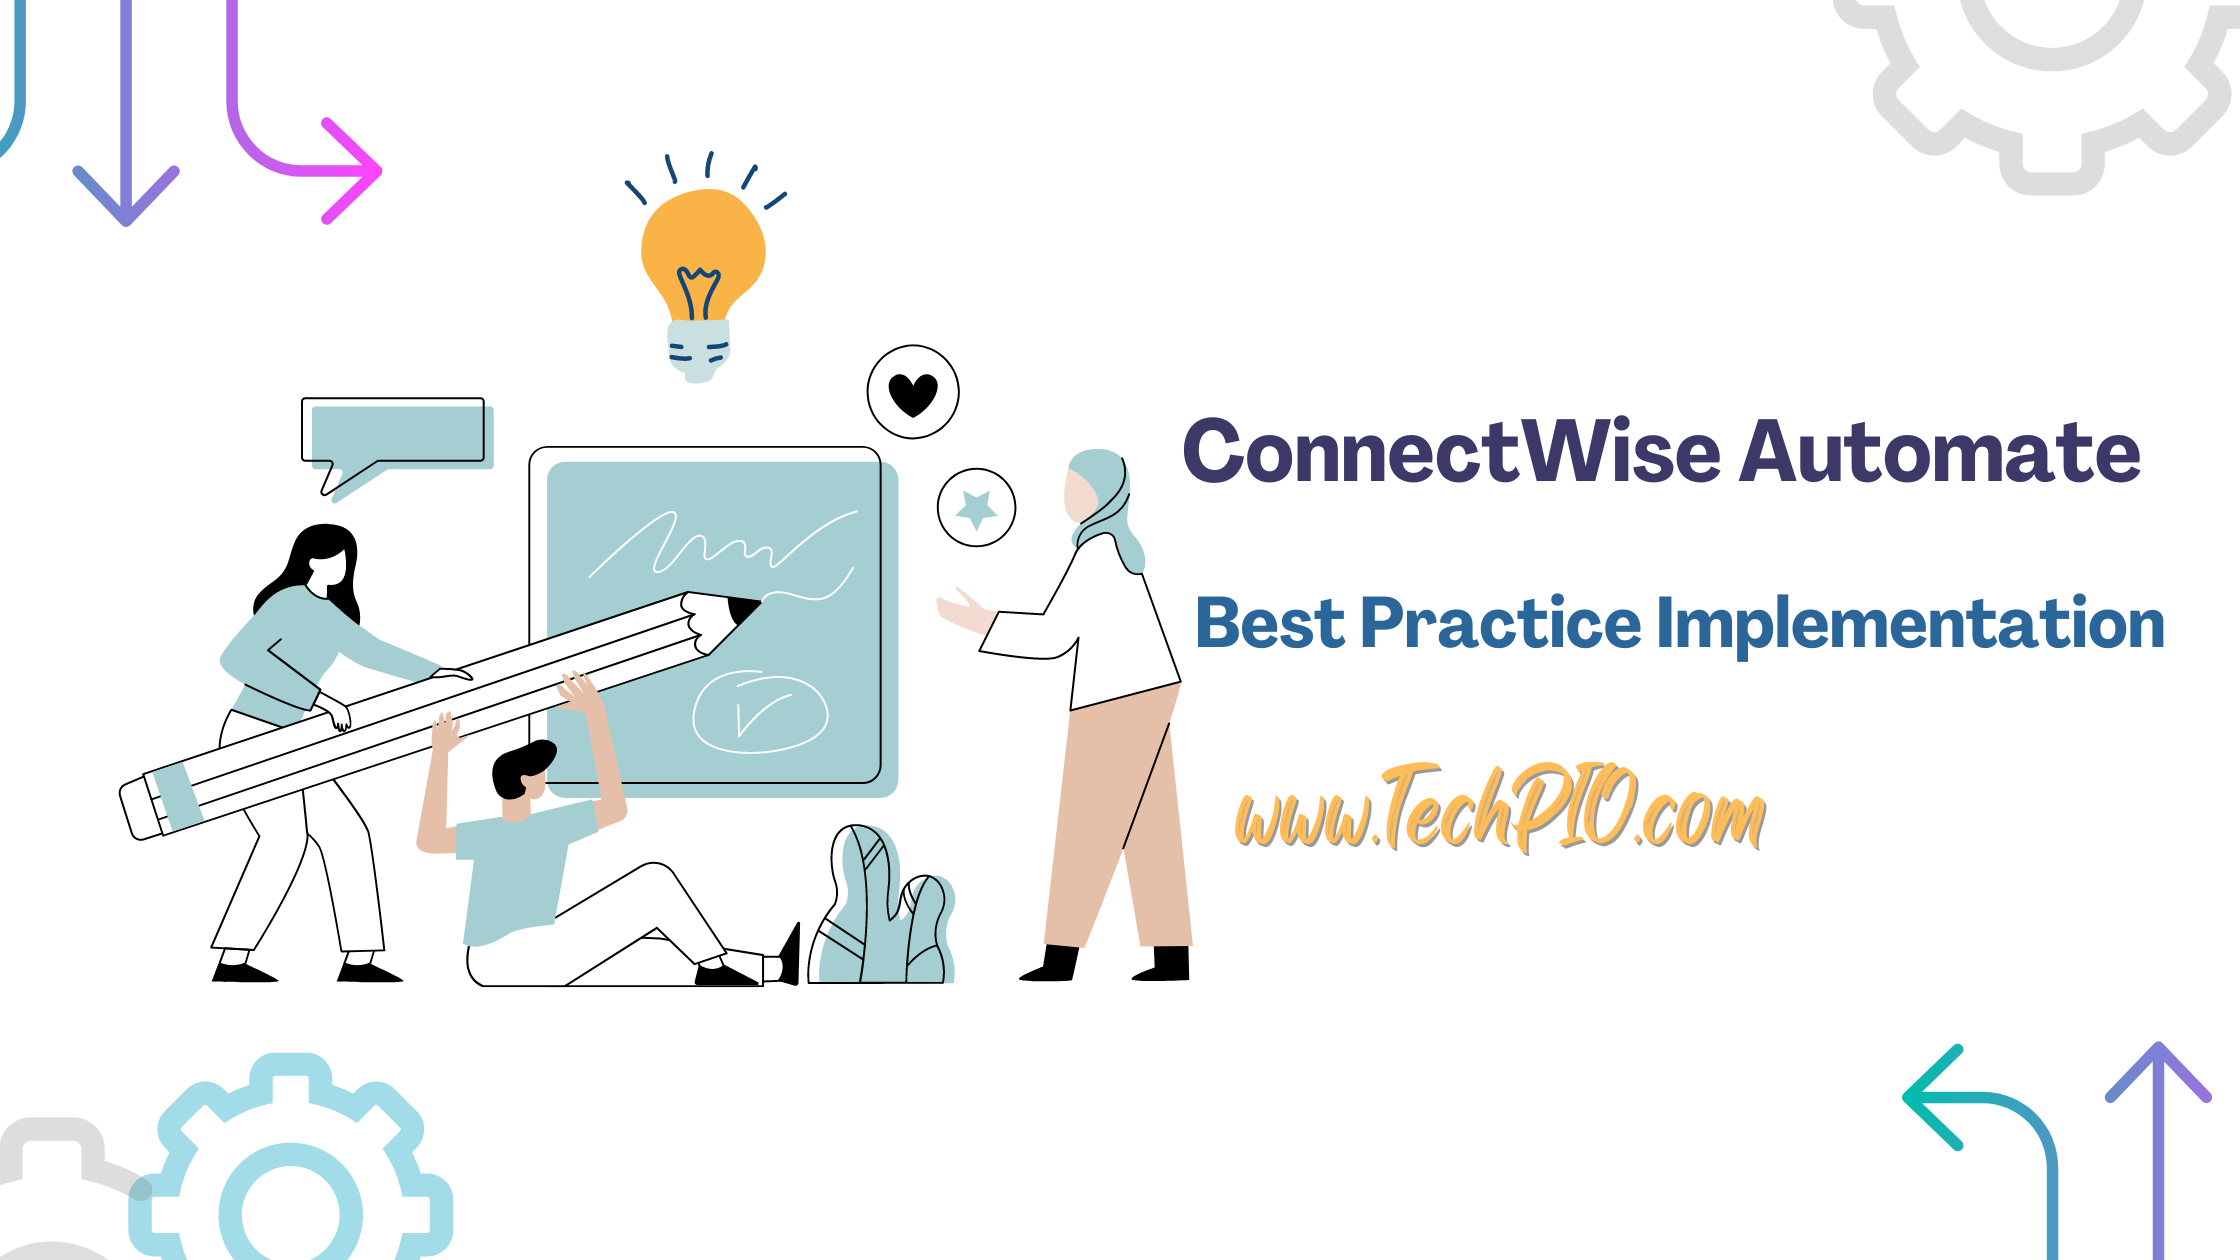 ConnectWise Automate Best Practice Implementation